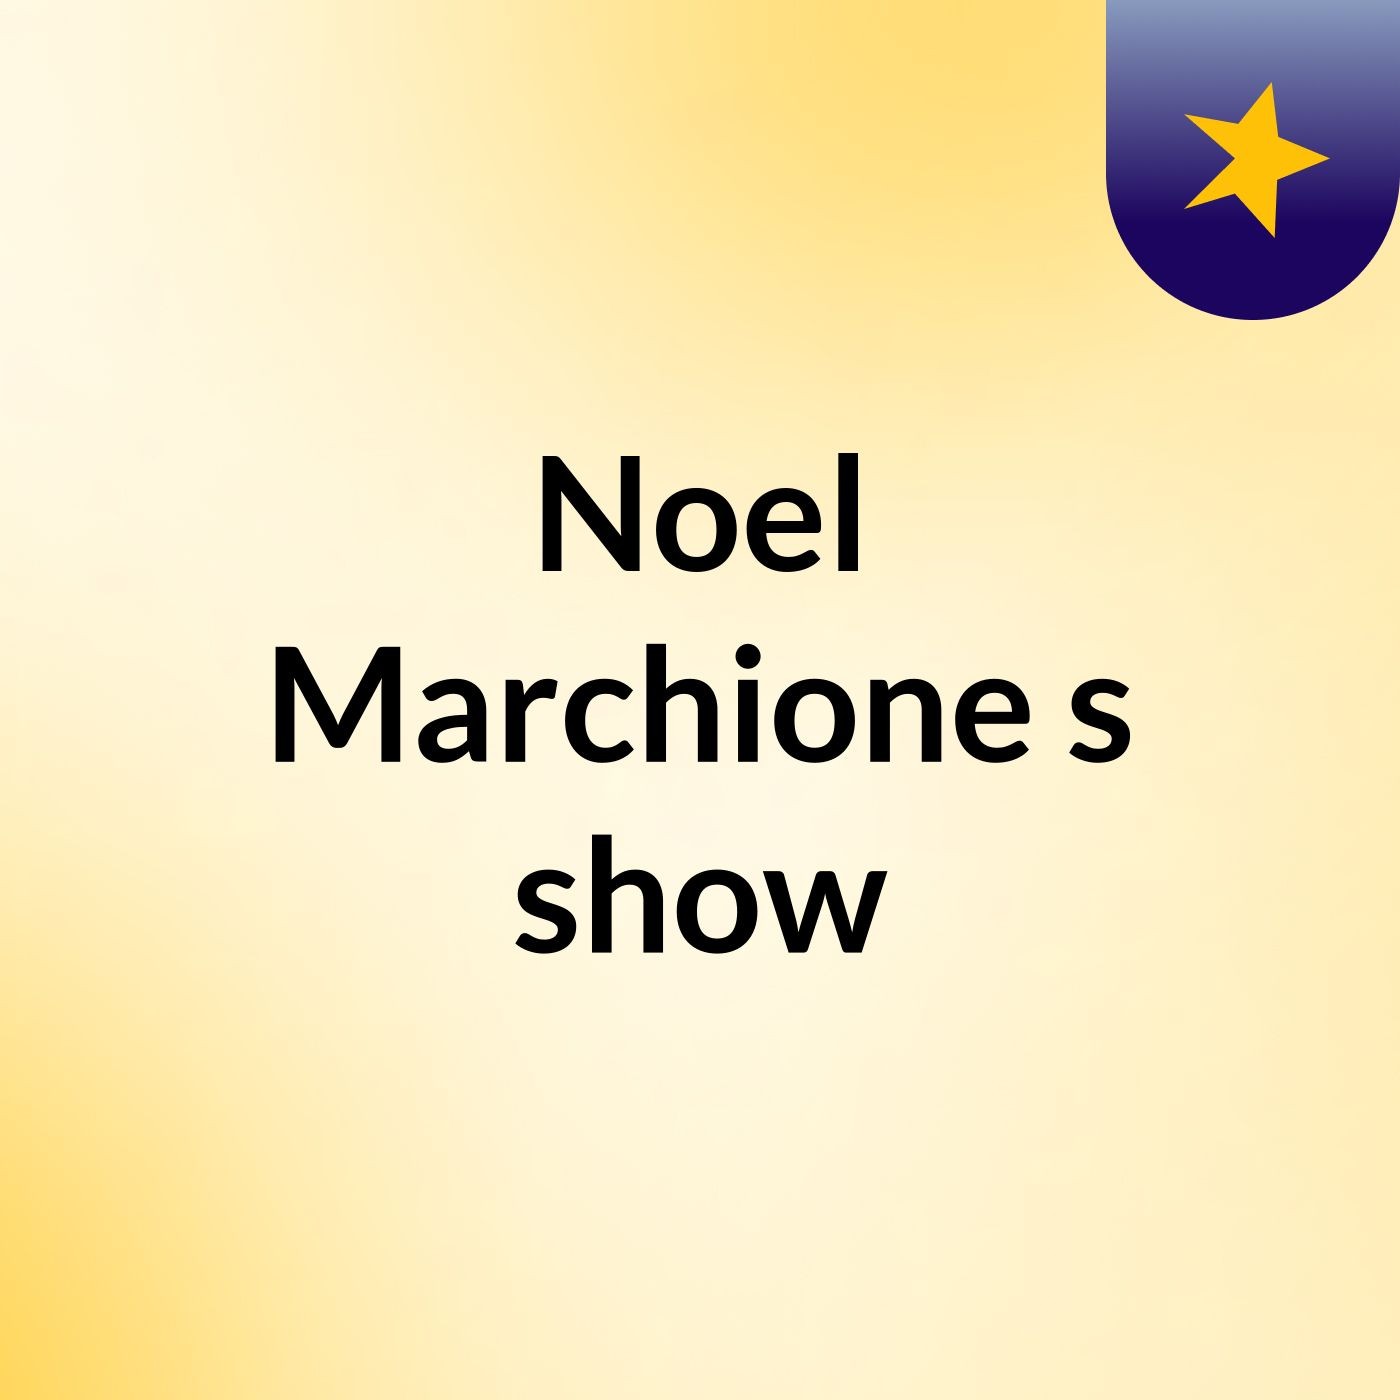 Noel Marchione's show